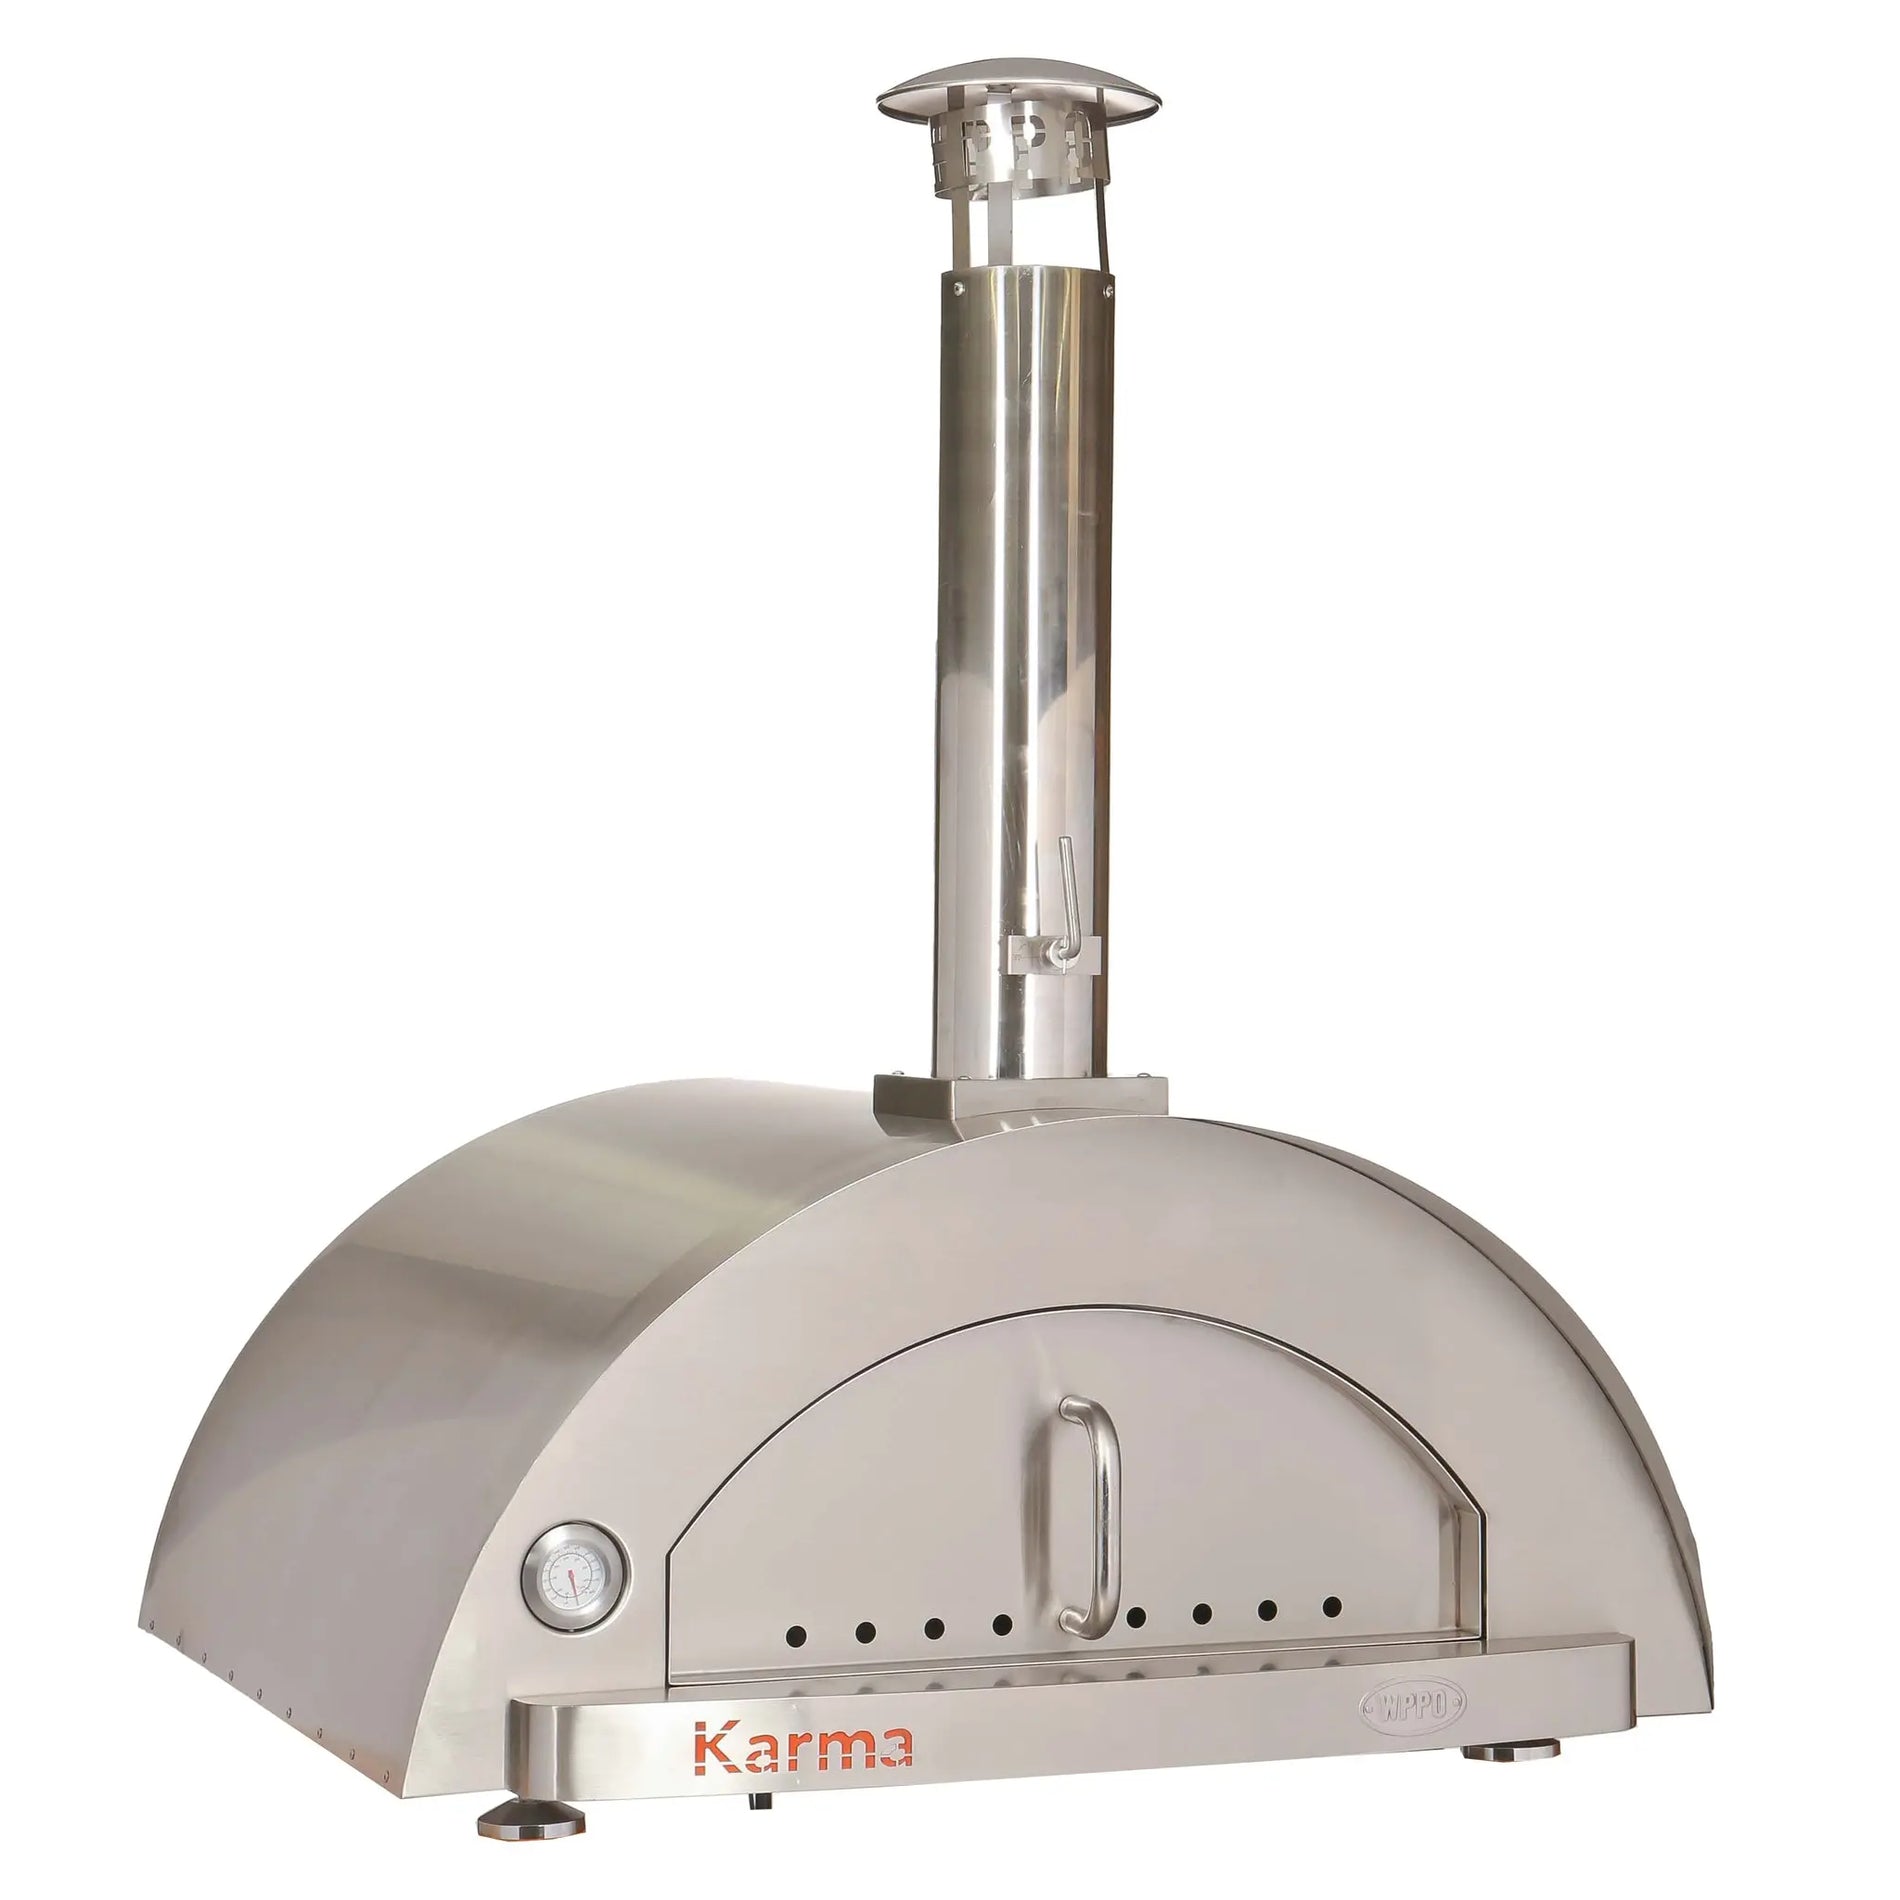 Karma 42 - 304SS Pizza Oven - Land Supply Canada